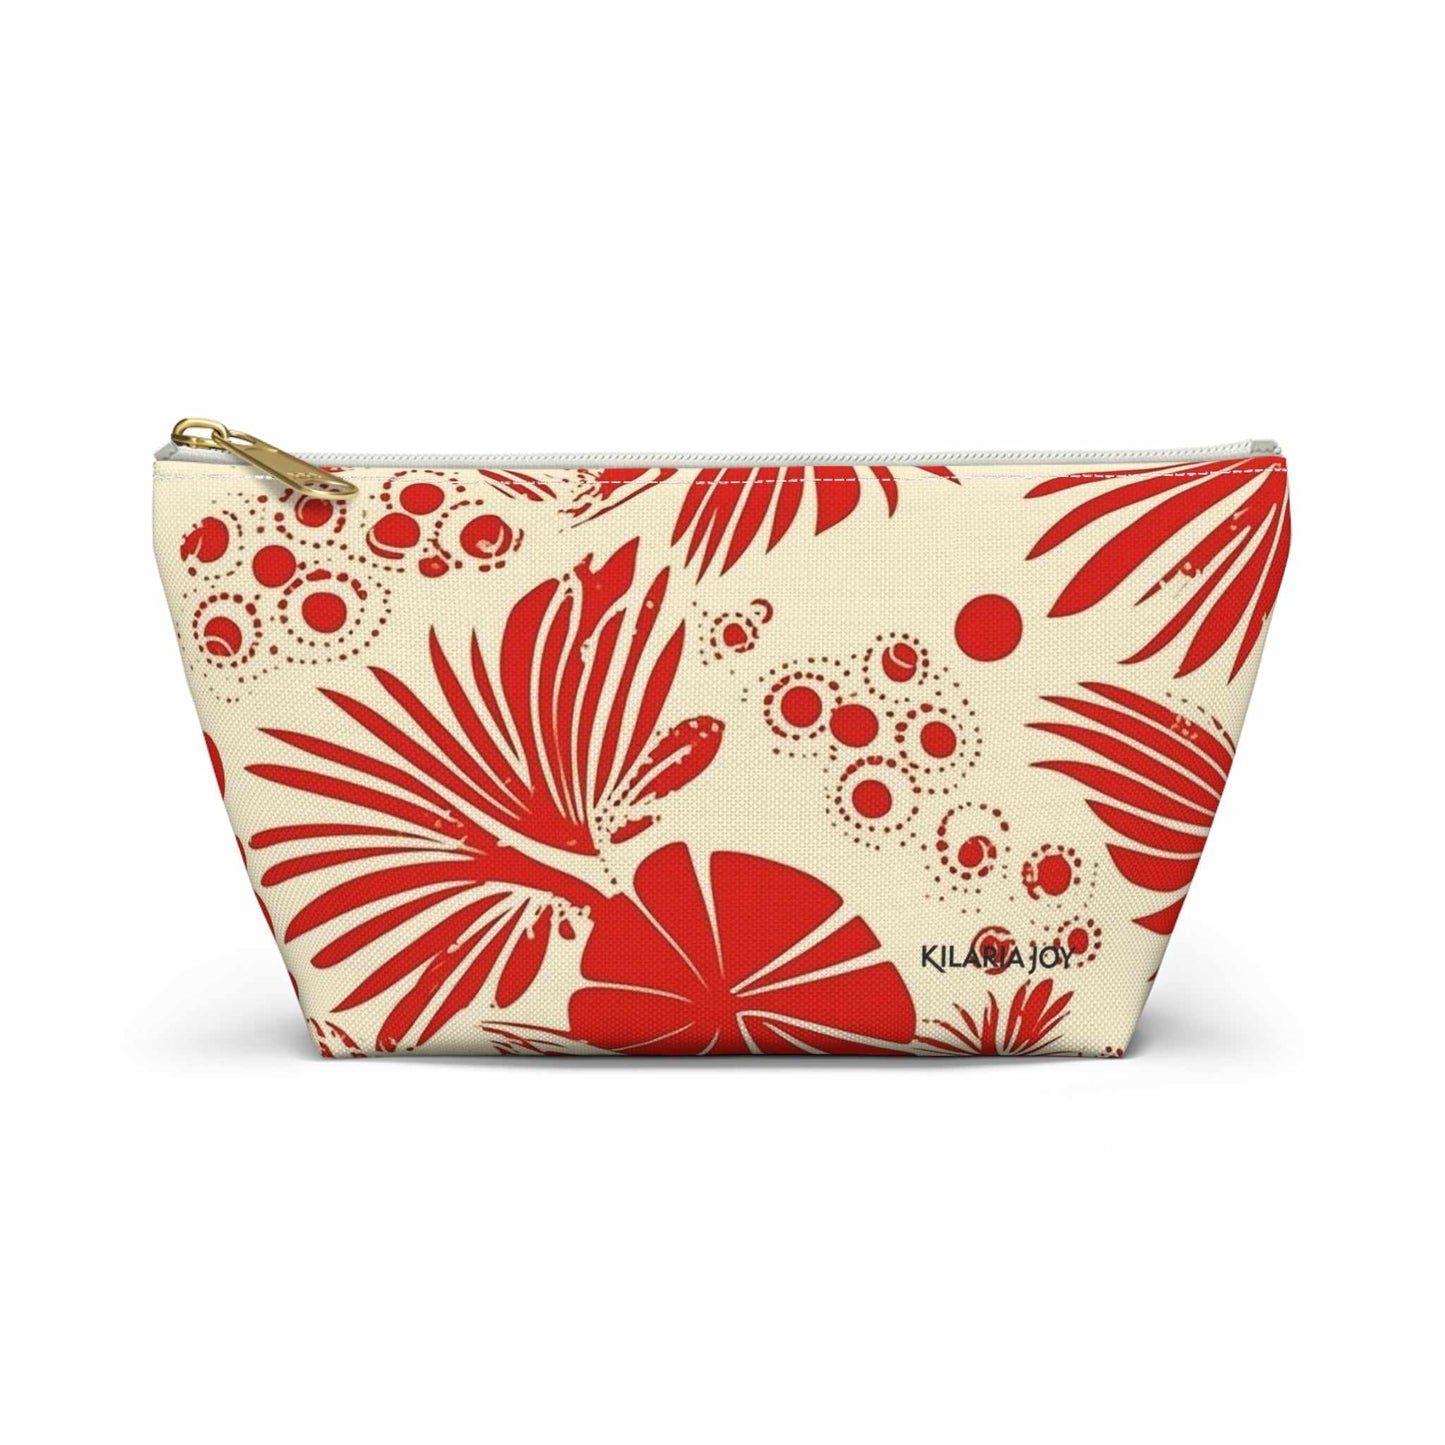 Steph Accessory Pouch, Cosmetic & Toiletry Bag, Travel Bag